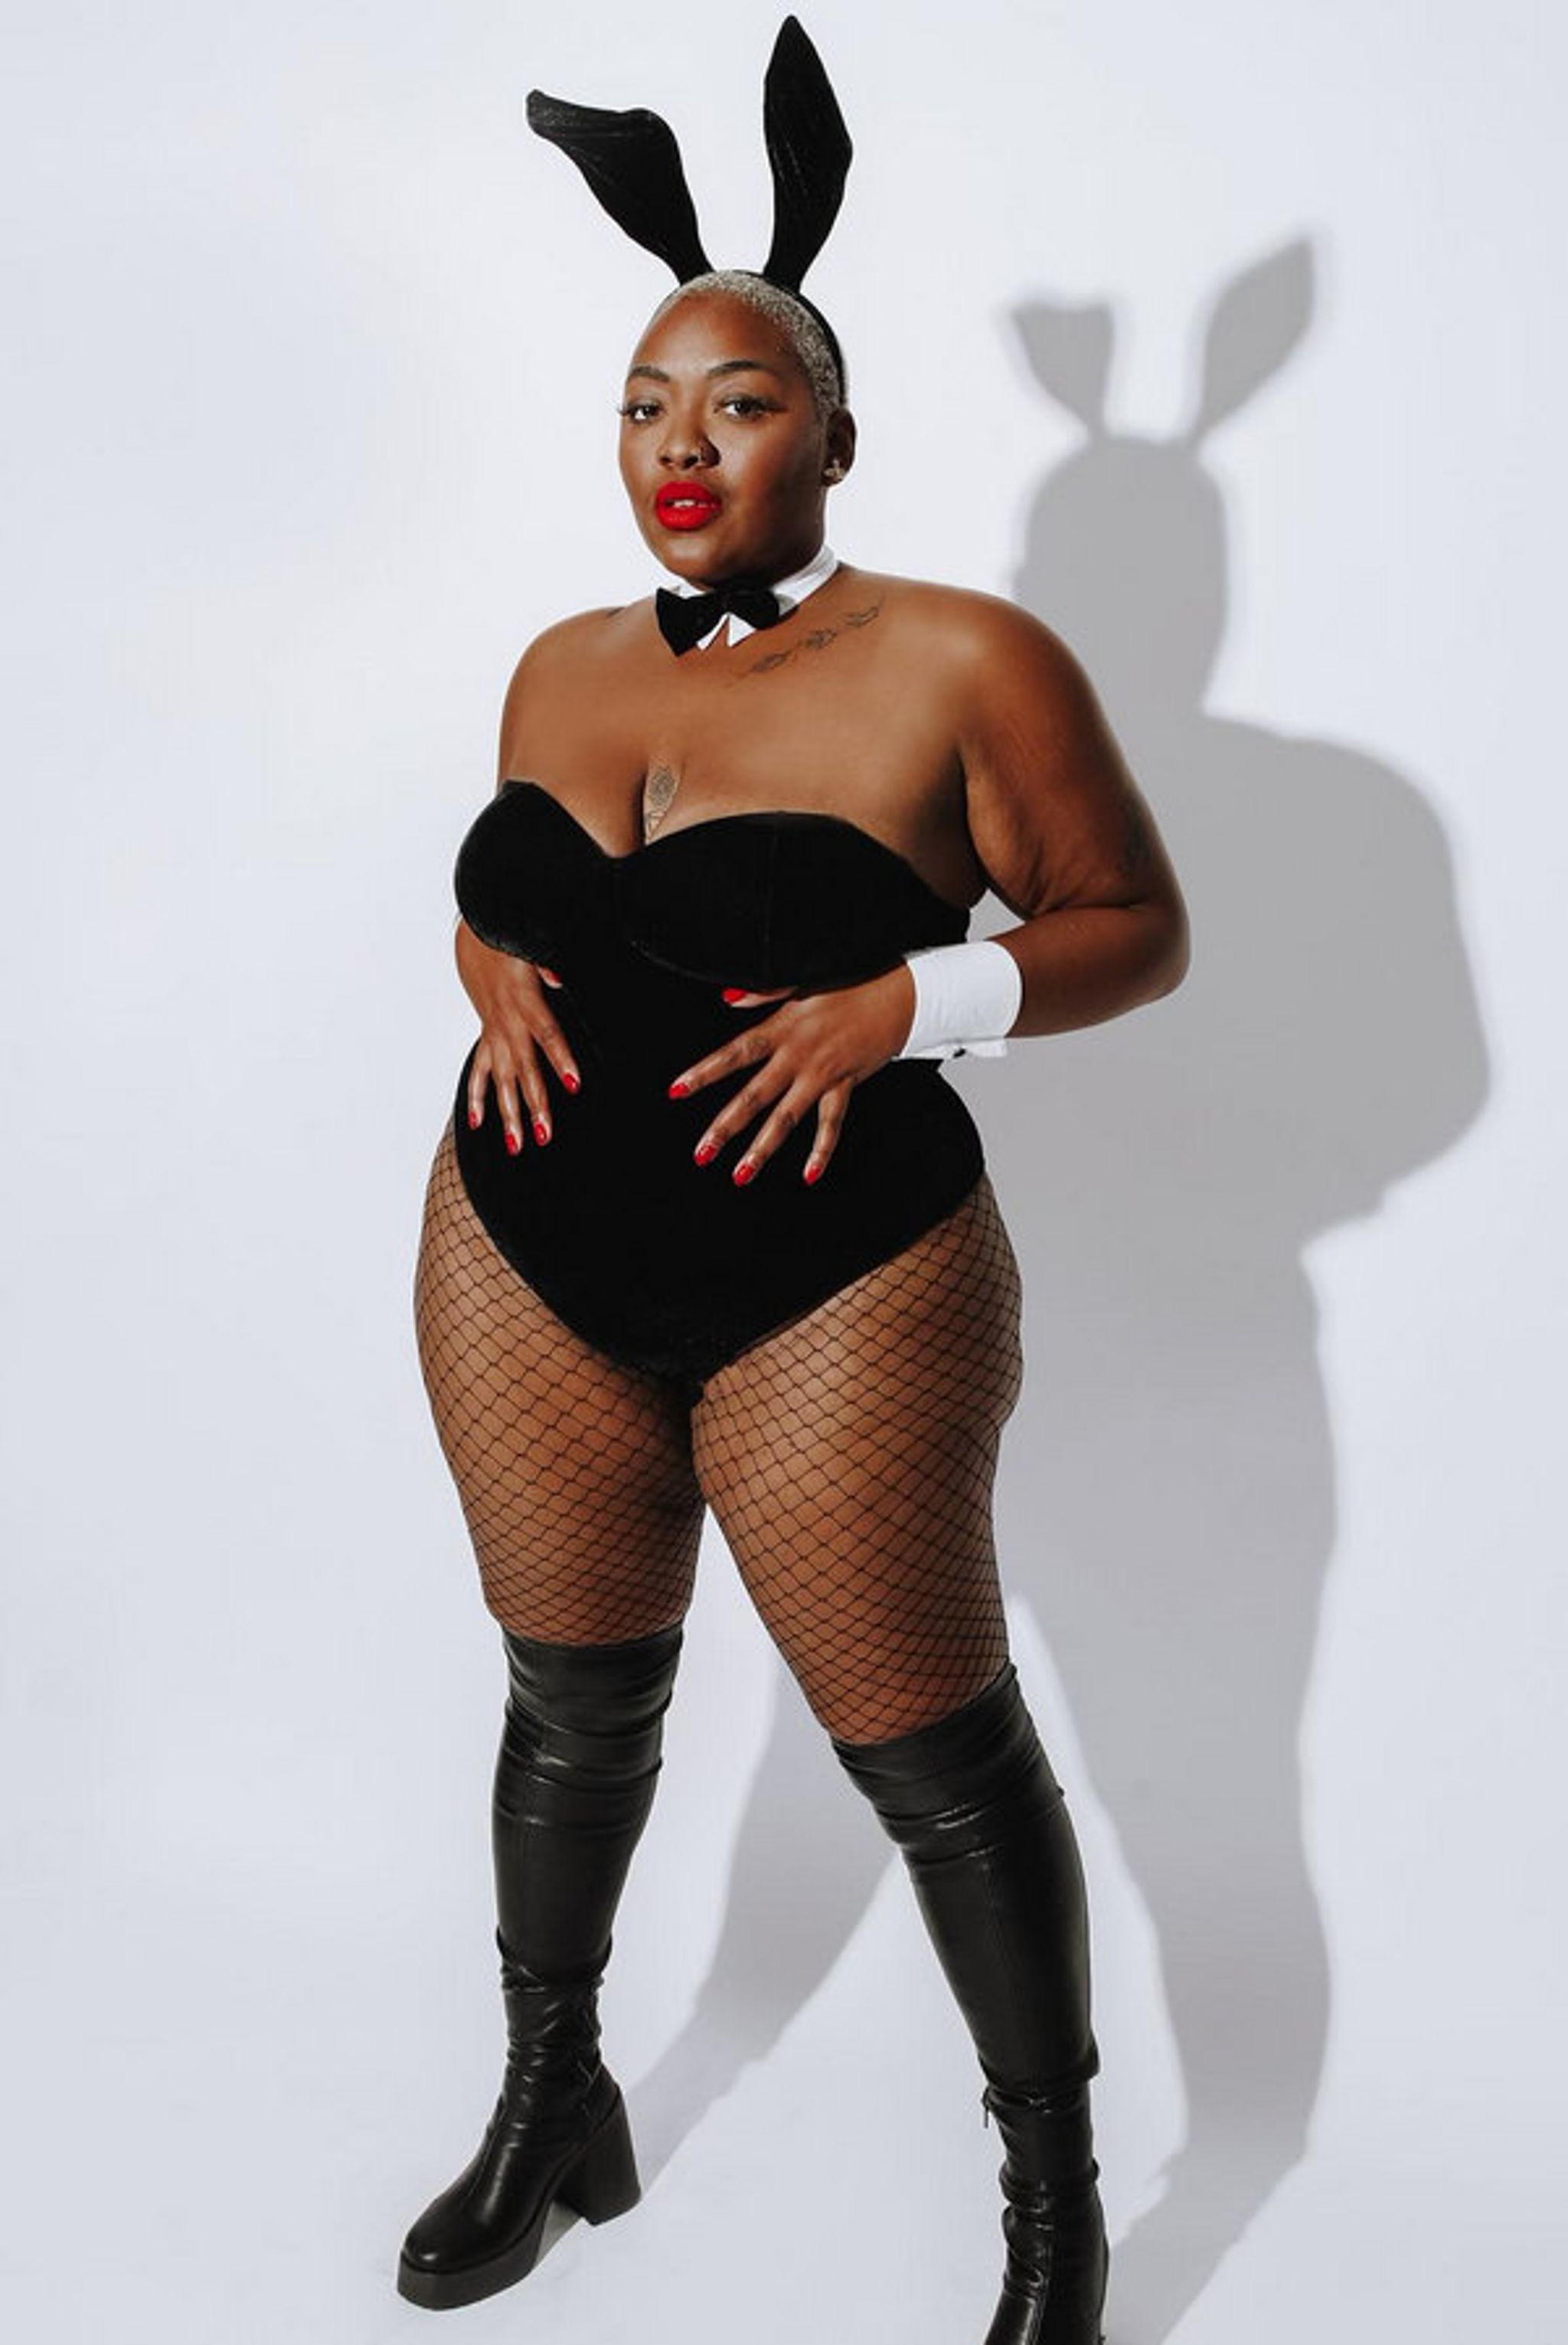 Plus Size Modeling page proves big is beautiful